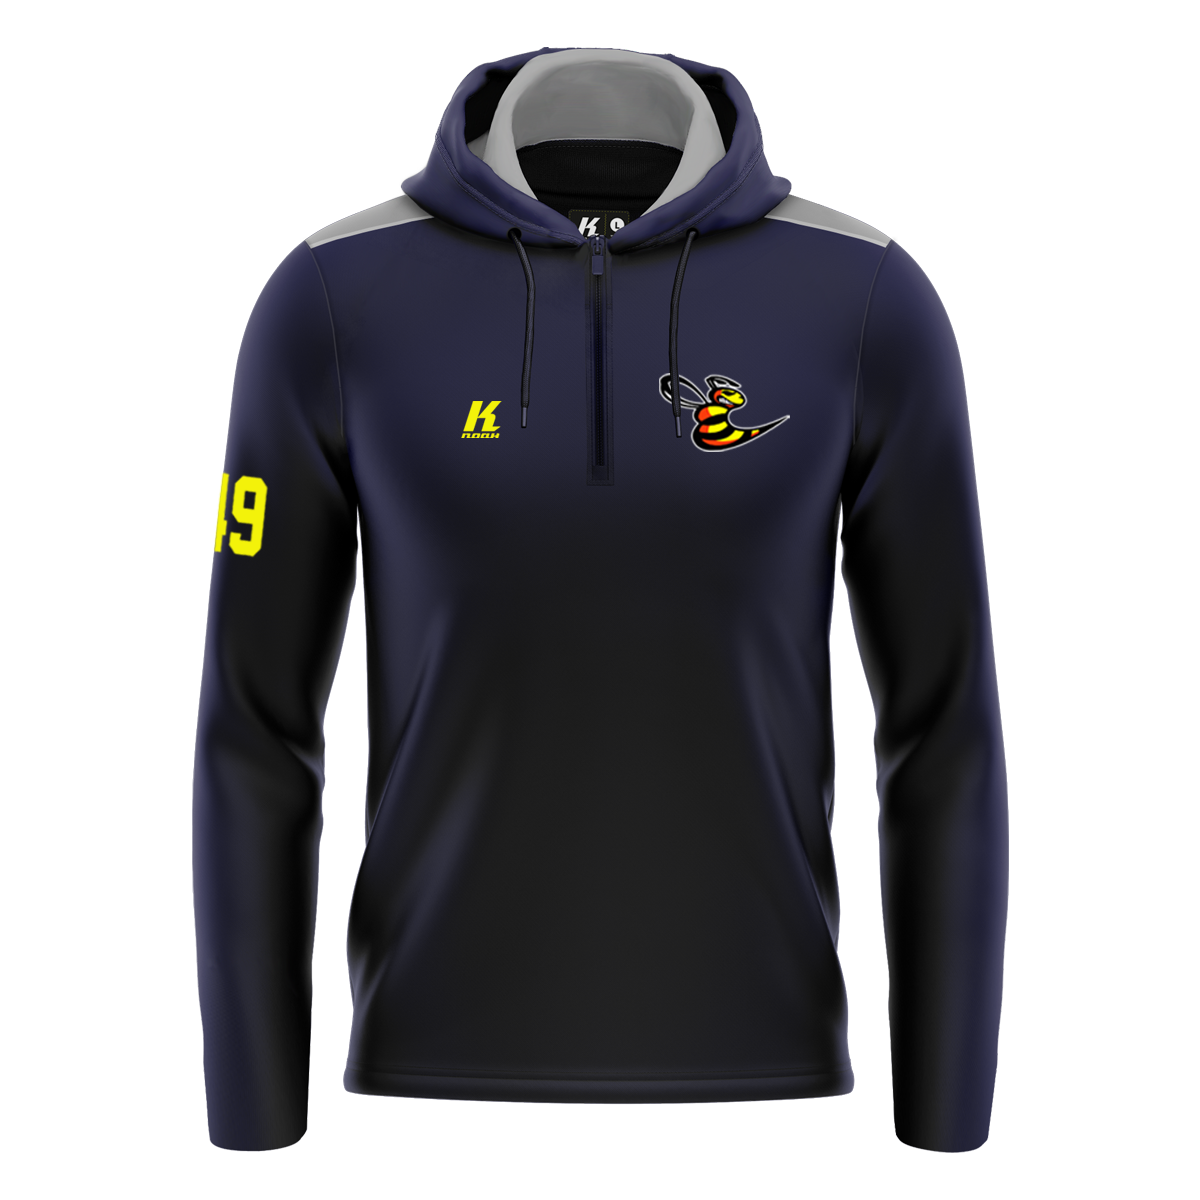 Hornets K.Tech-Fiber Hoodie “Heritage” with Playernumber/Initials